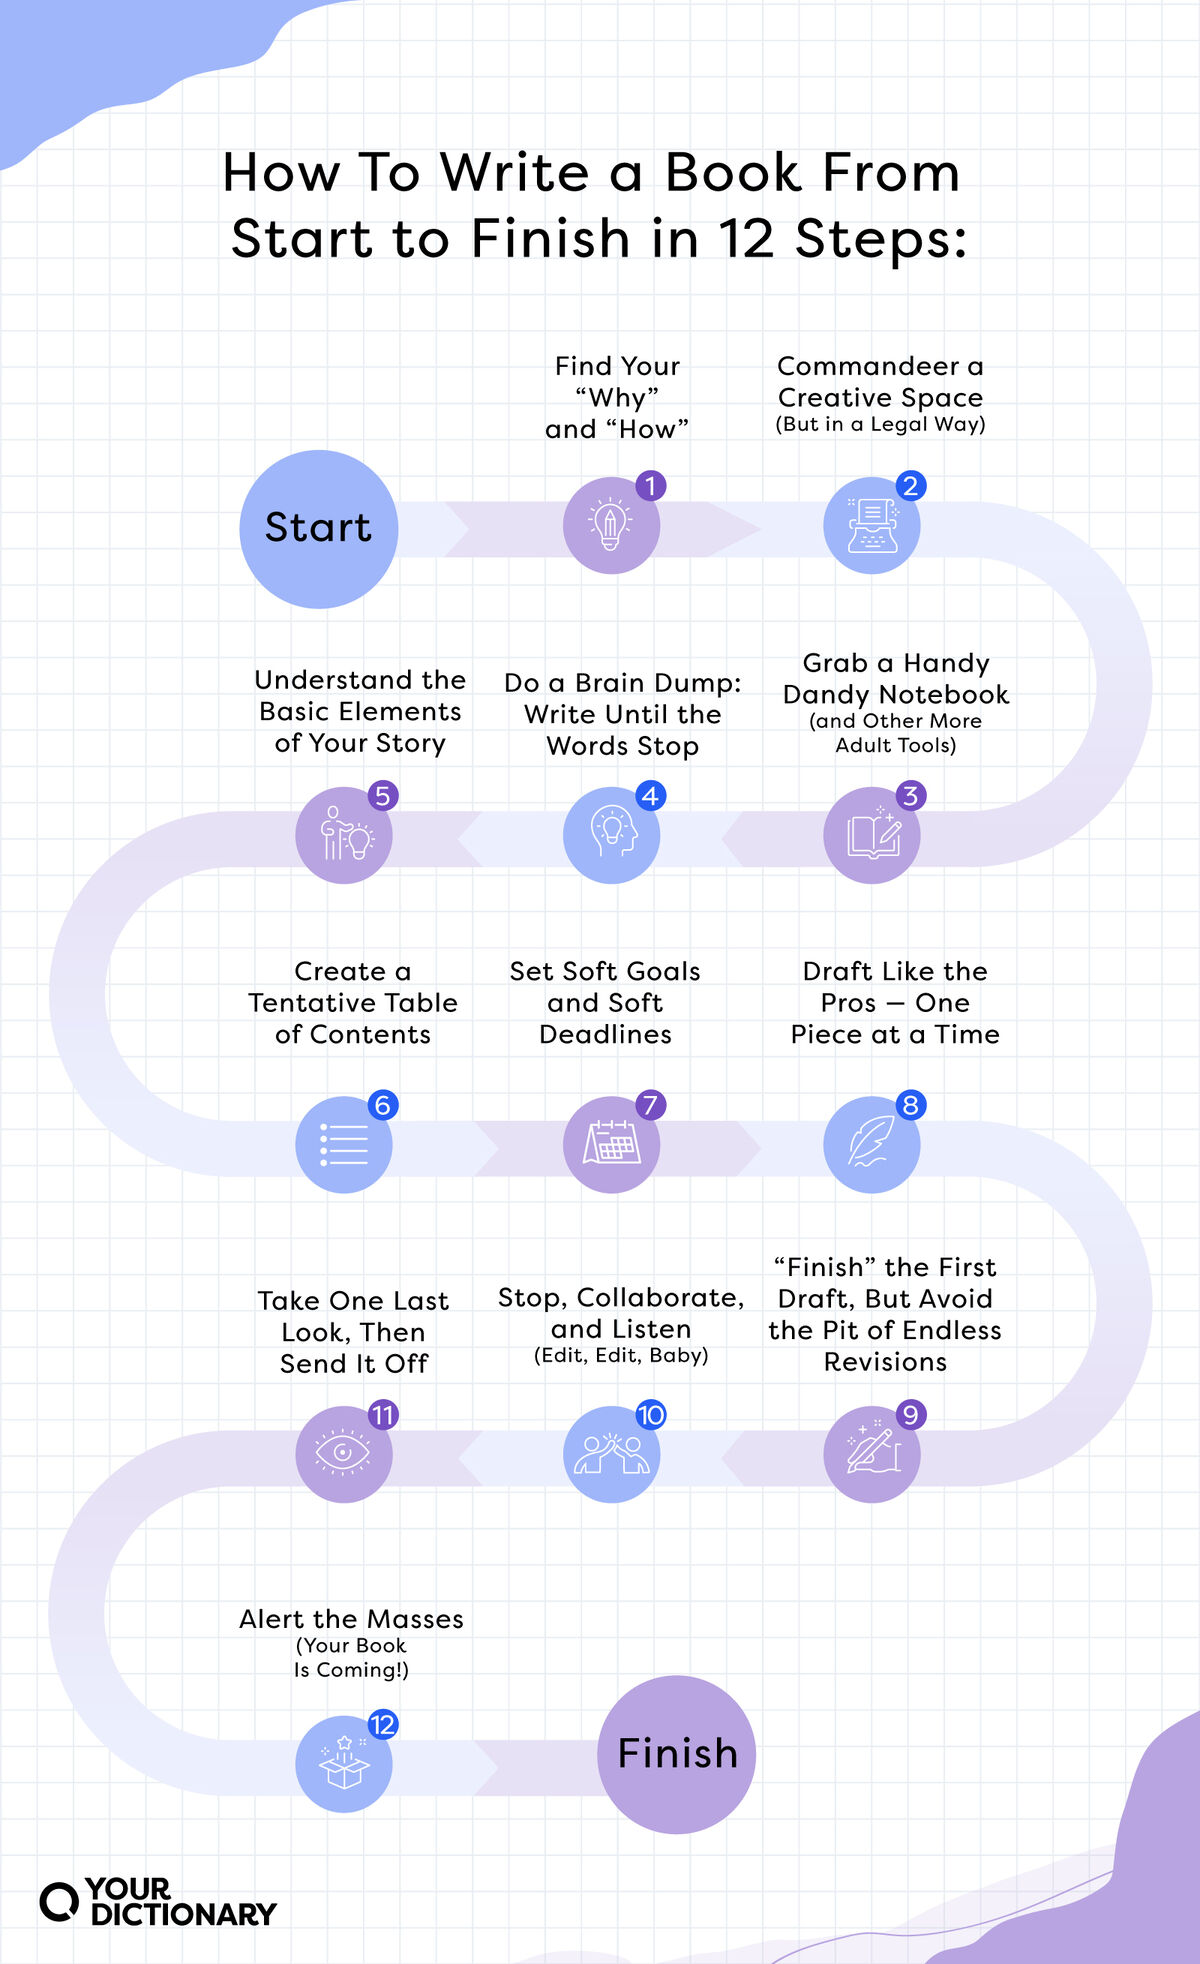 12 steps outlined in article to write a book from start to finish in a timeline infographic